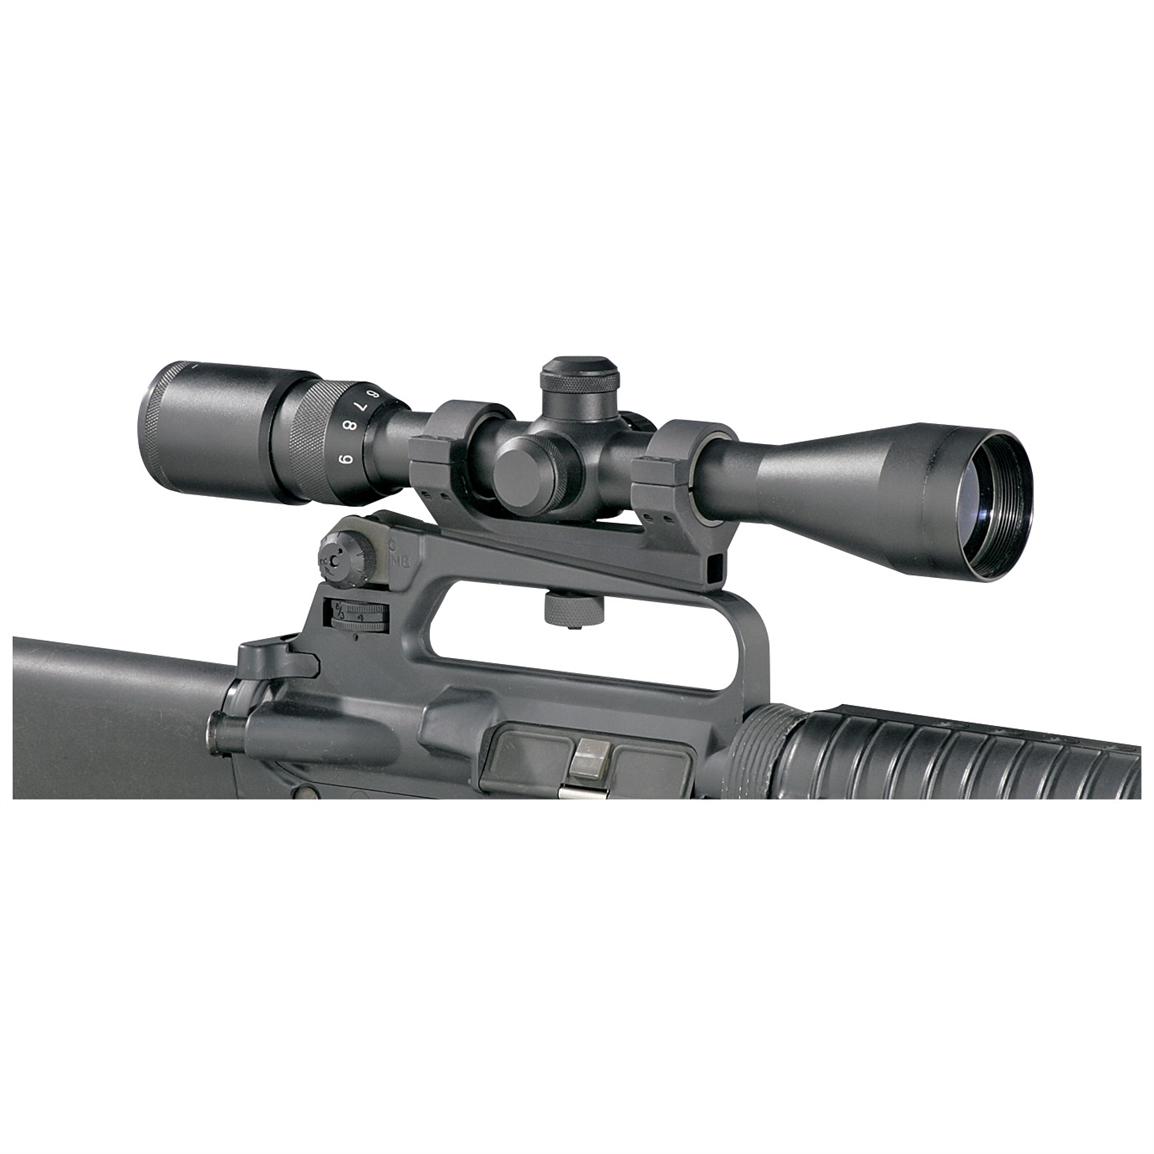 Colt® Ar 15m16 Carry Handle Scope Mount 105154 Tactical Rifle Accessories At Sportsmans Guide